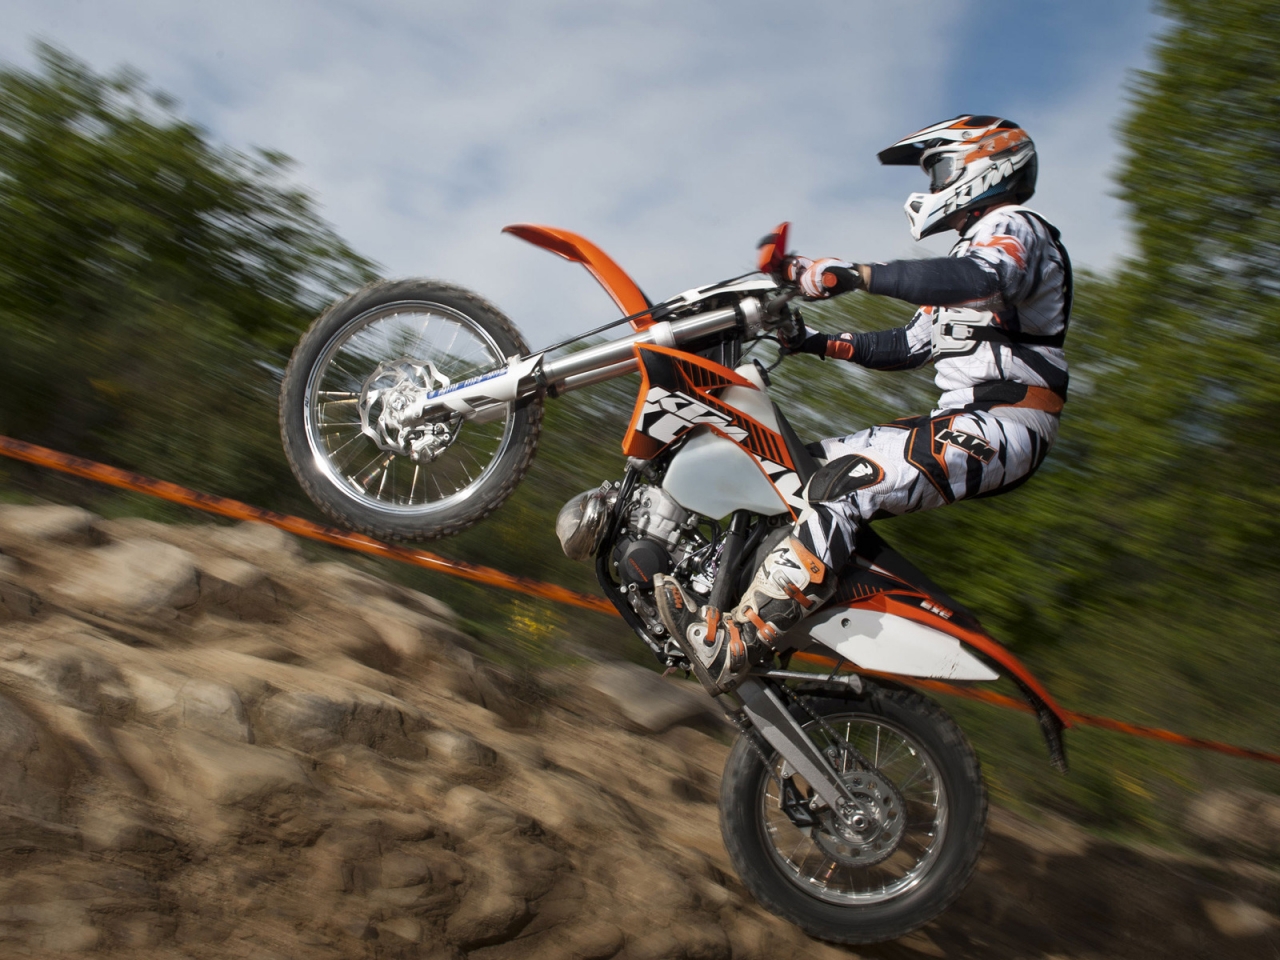 KTM EXC 200 2012 for 1280 x 960 resolution